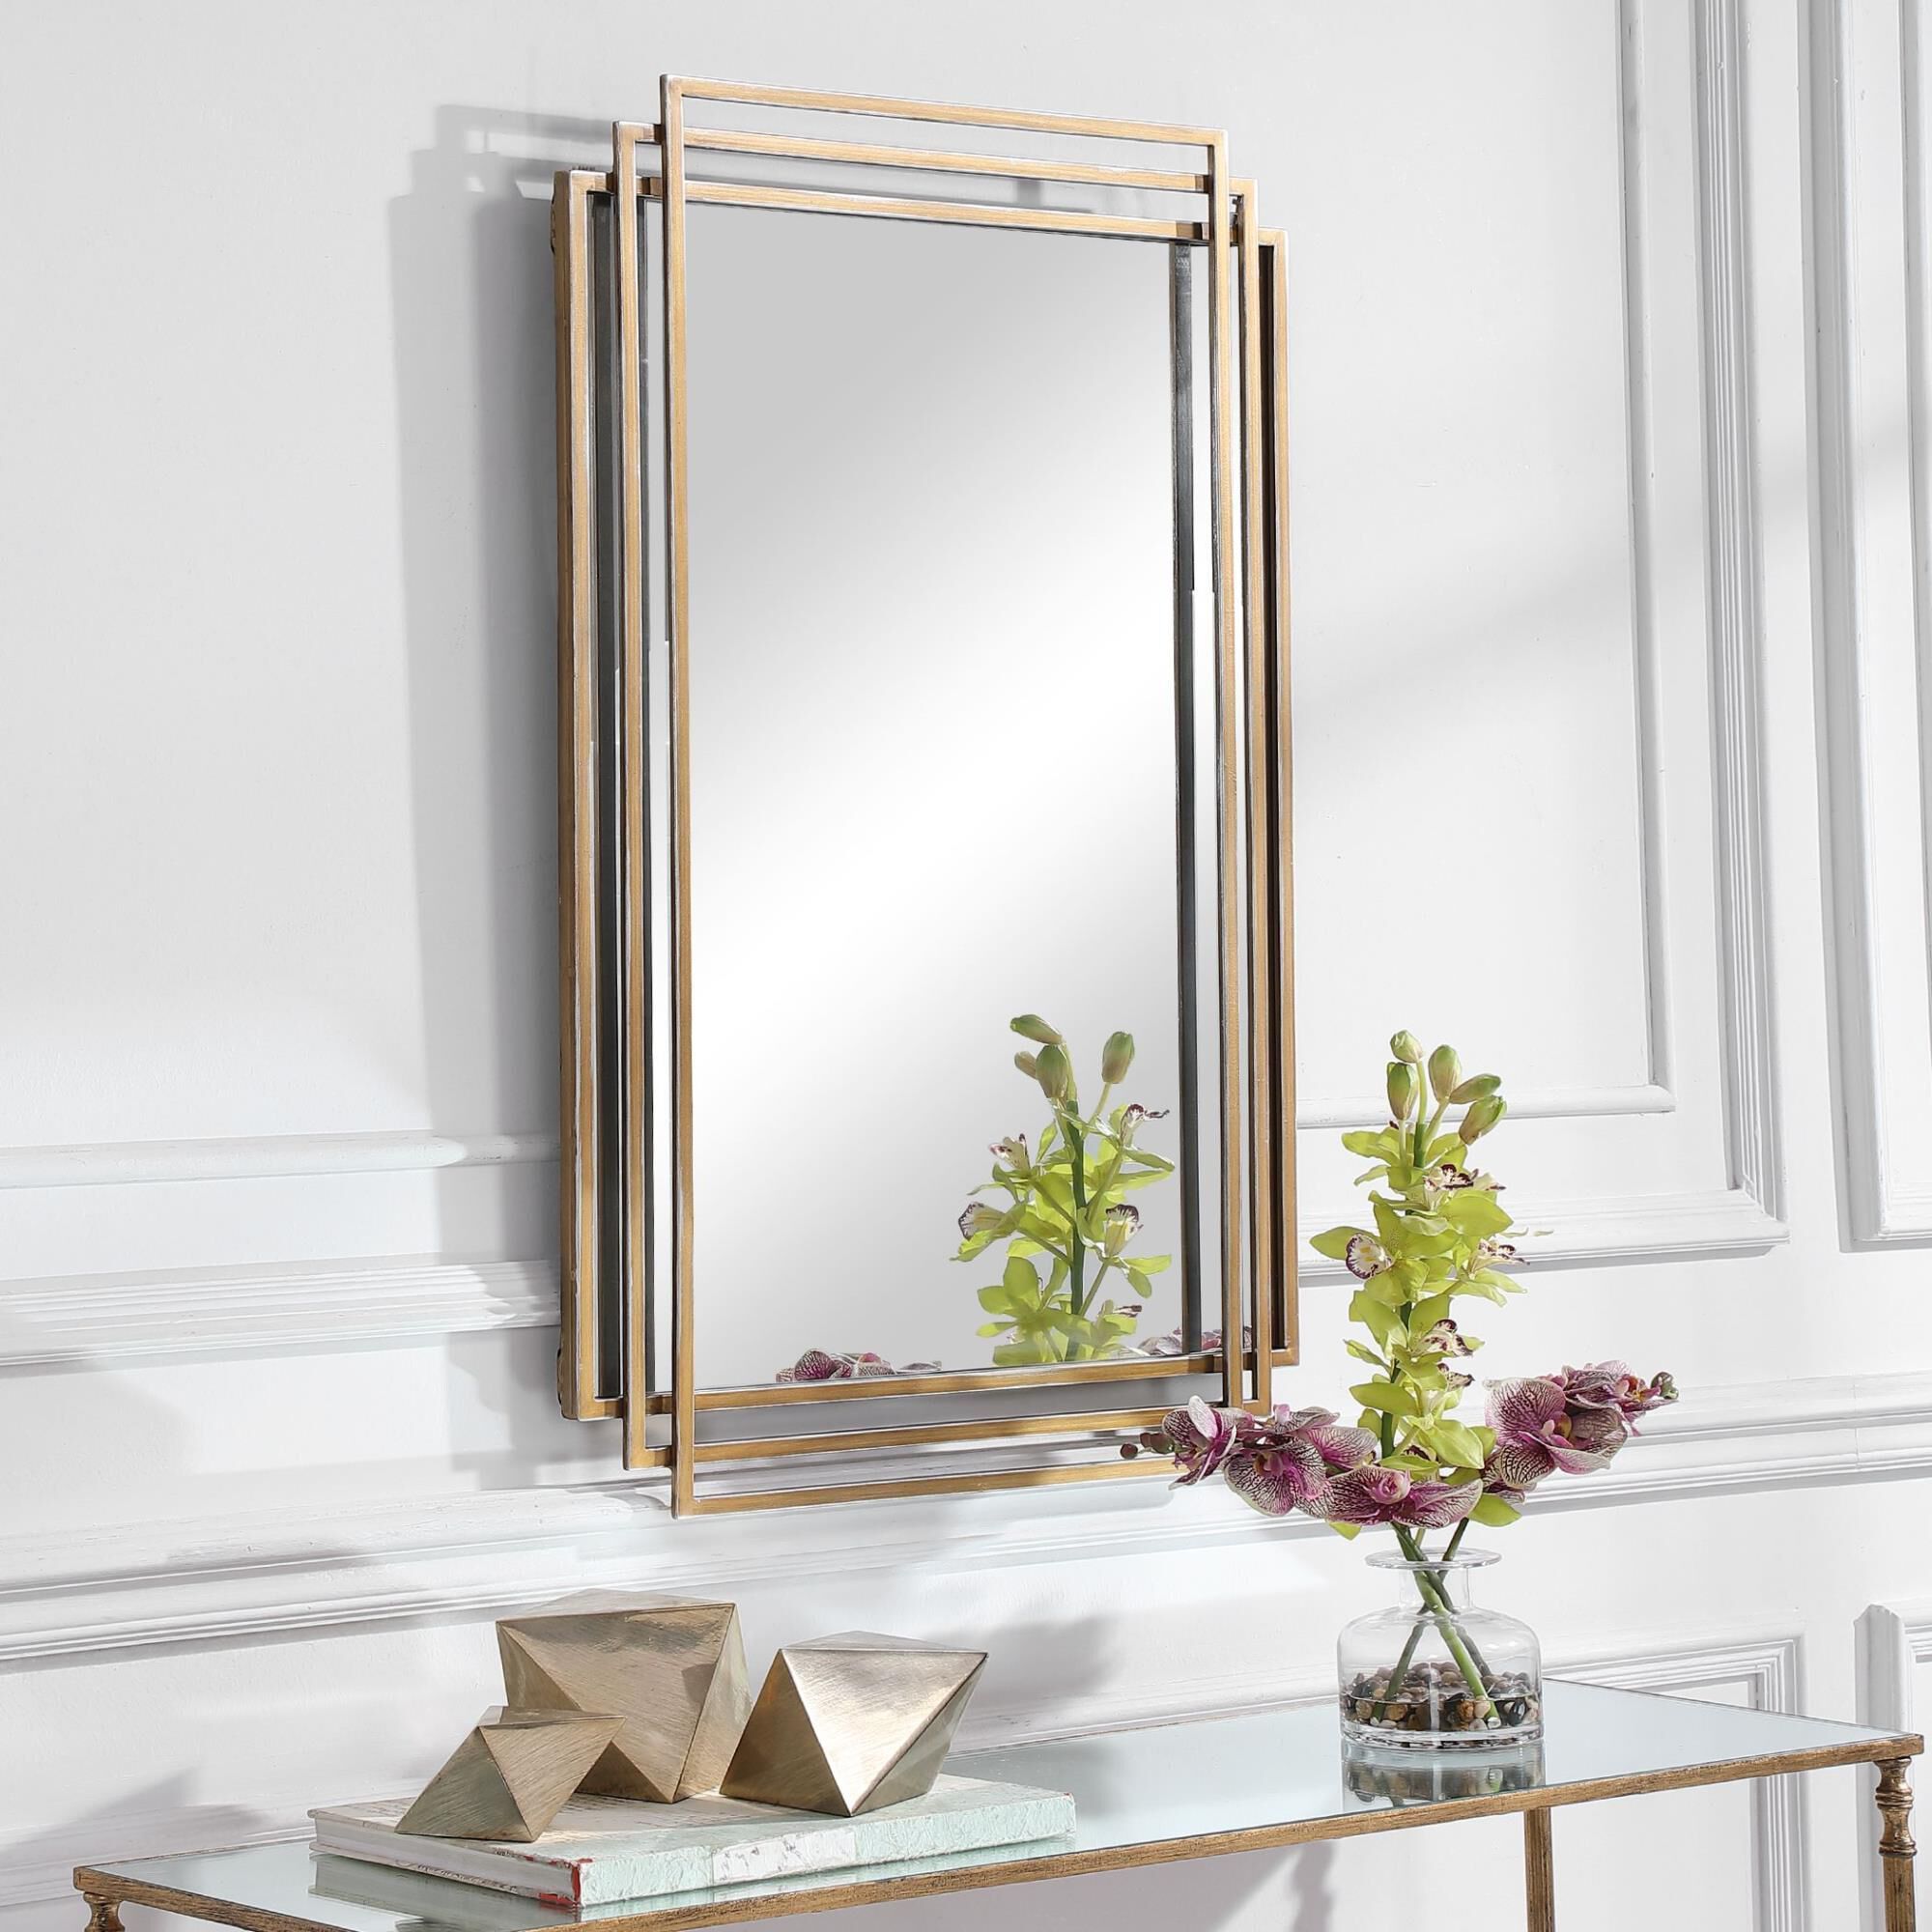 Uttermost Amherst Brushed Gold Mirror Decorative Mirrors | Capitol With Brushed Gold Wall Mirrors (View 1 of 15)